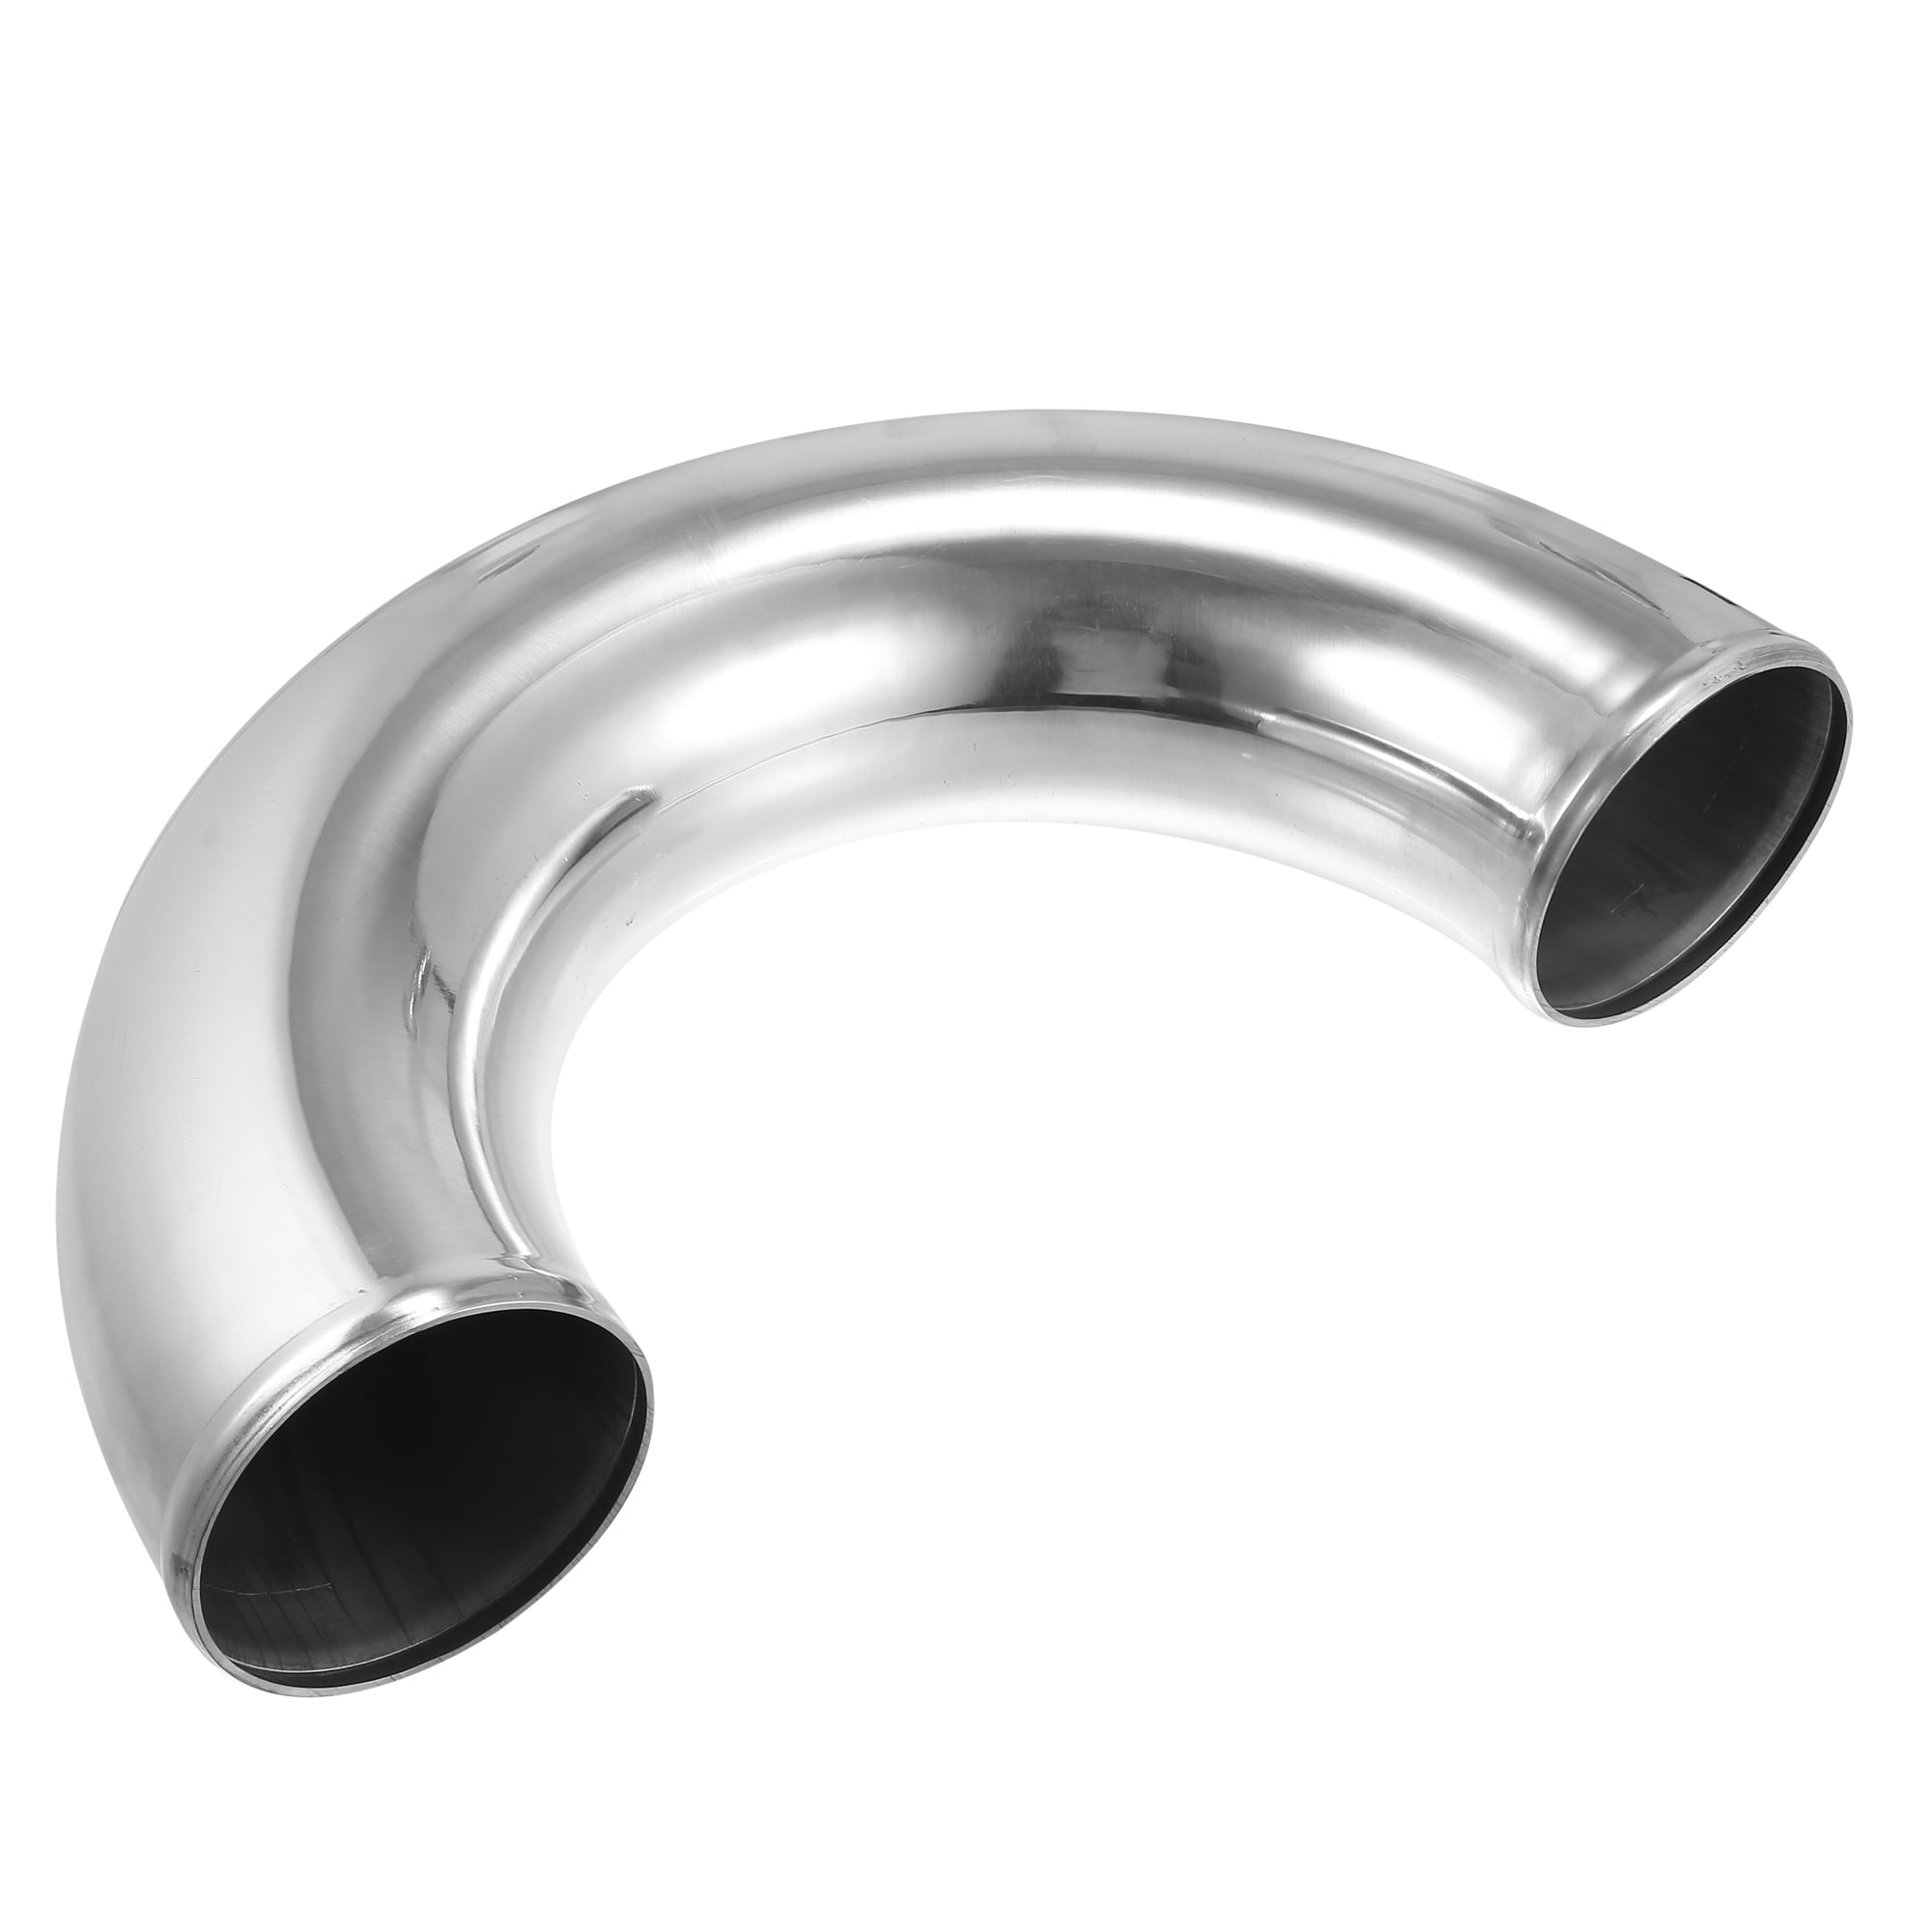 Aluminium pipe S-shape Polished Universal Alloy Intercooler Pipe Joiner 